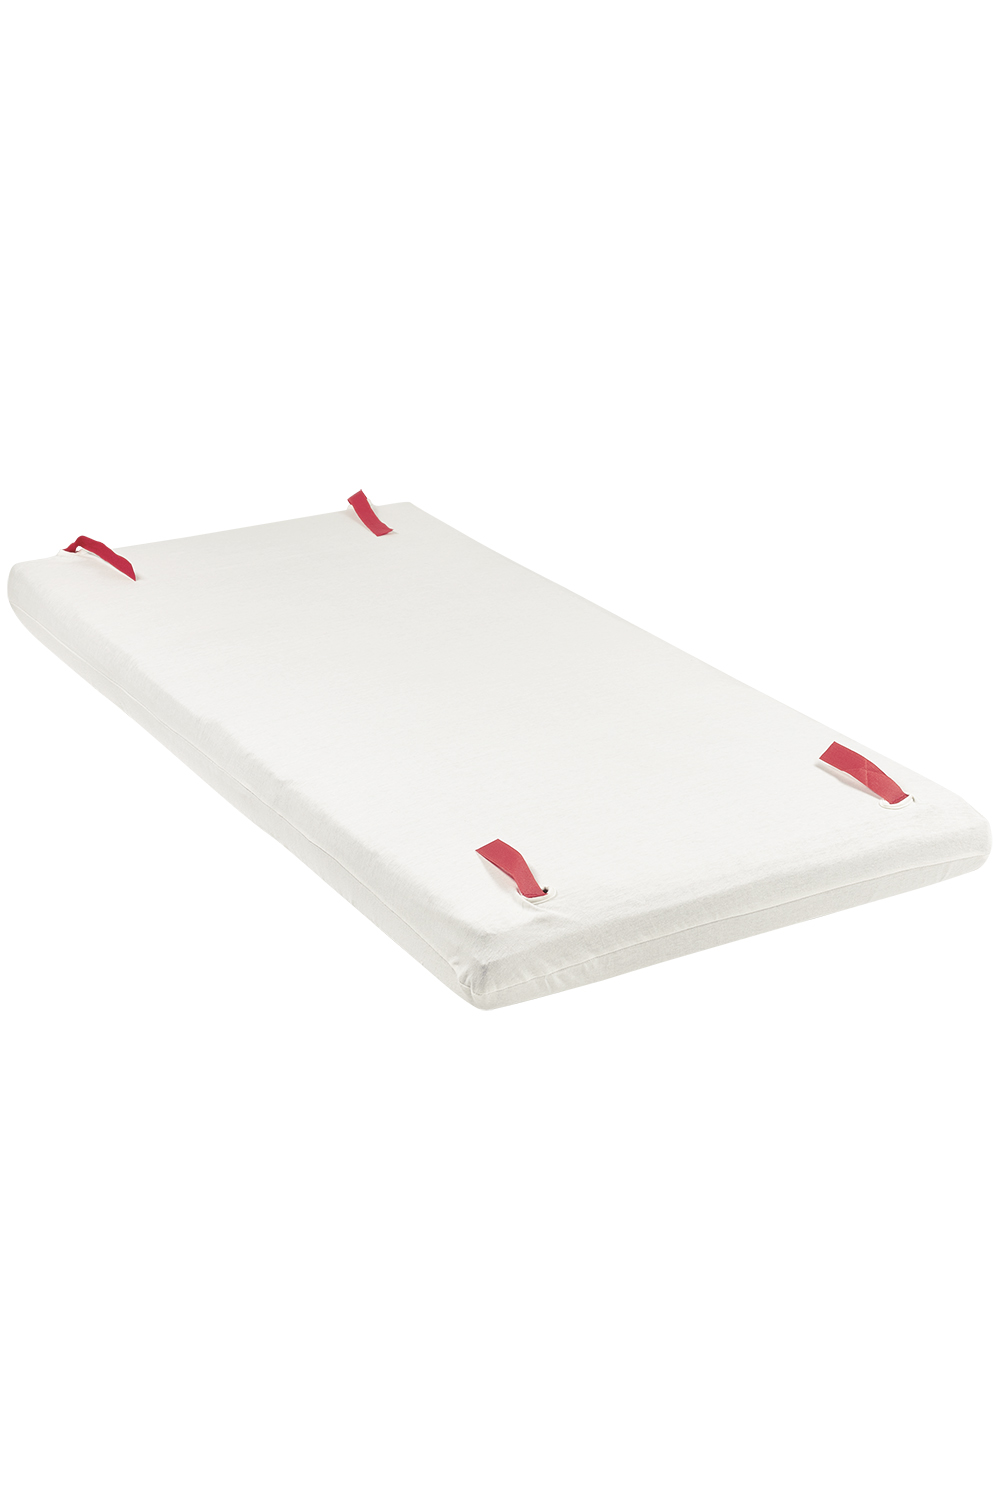 Jersey Campingbed Matrashoes DeLuxe - Offwhite - 60x120cm 